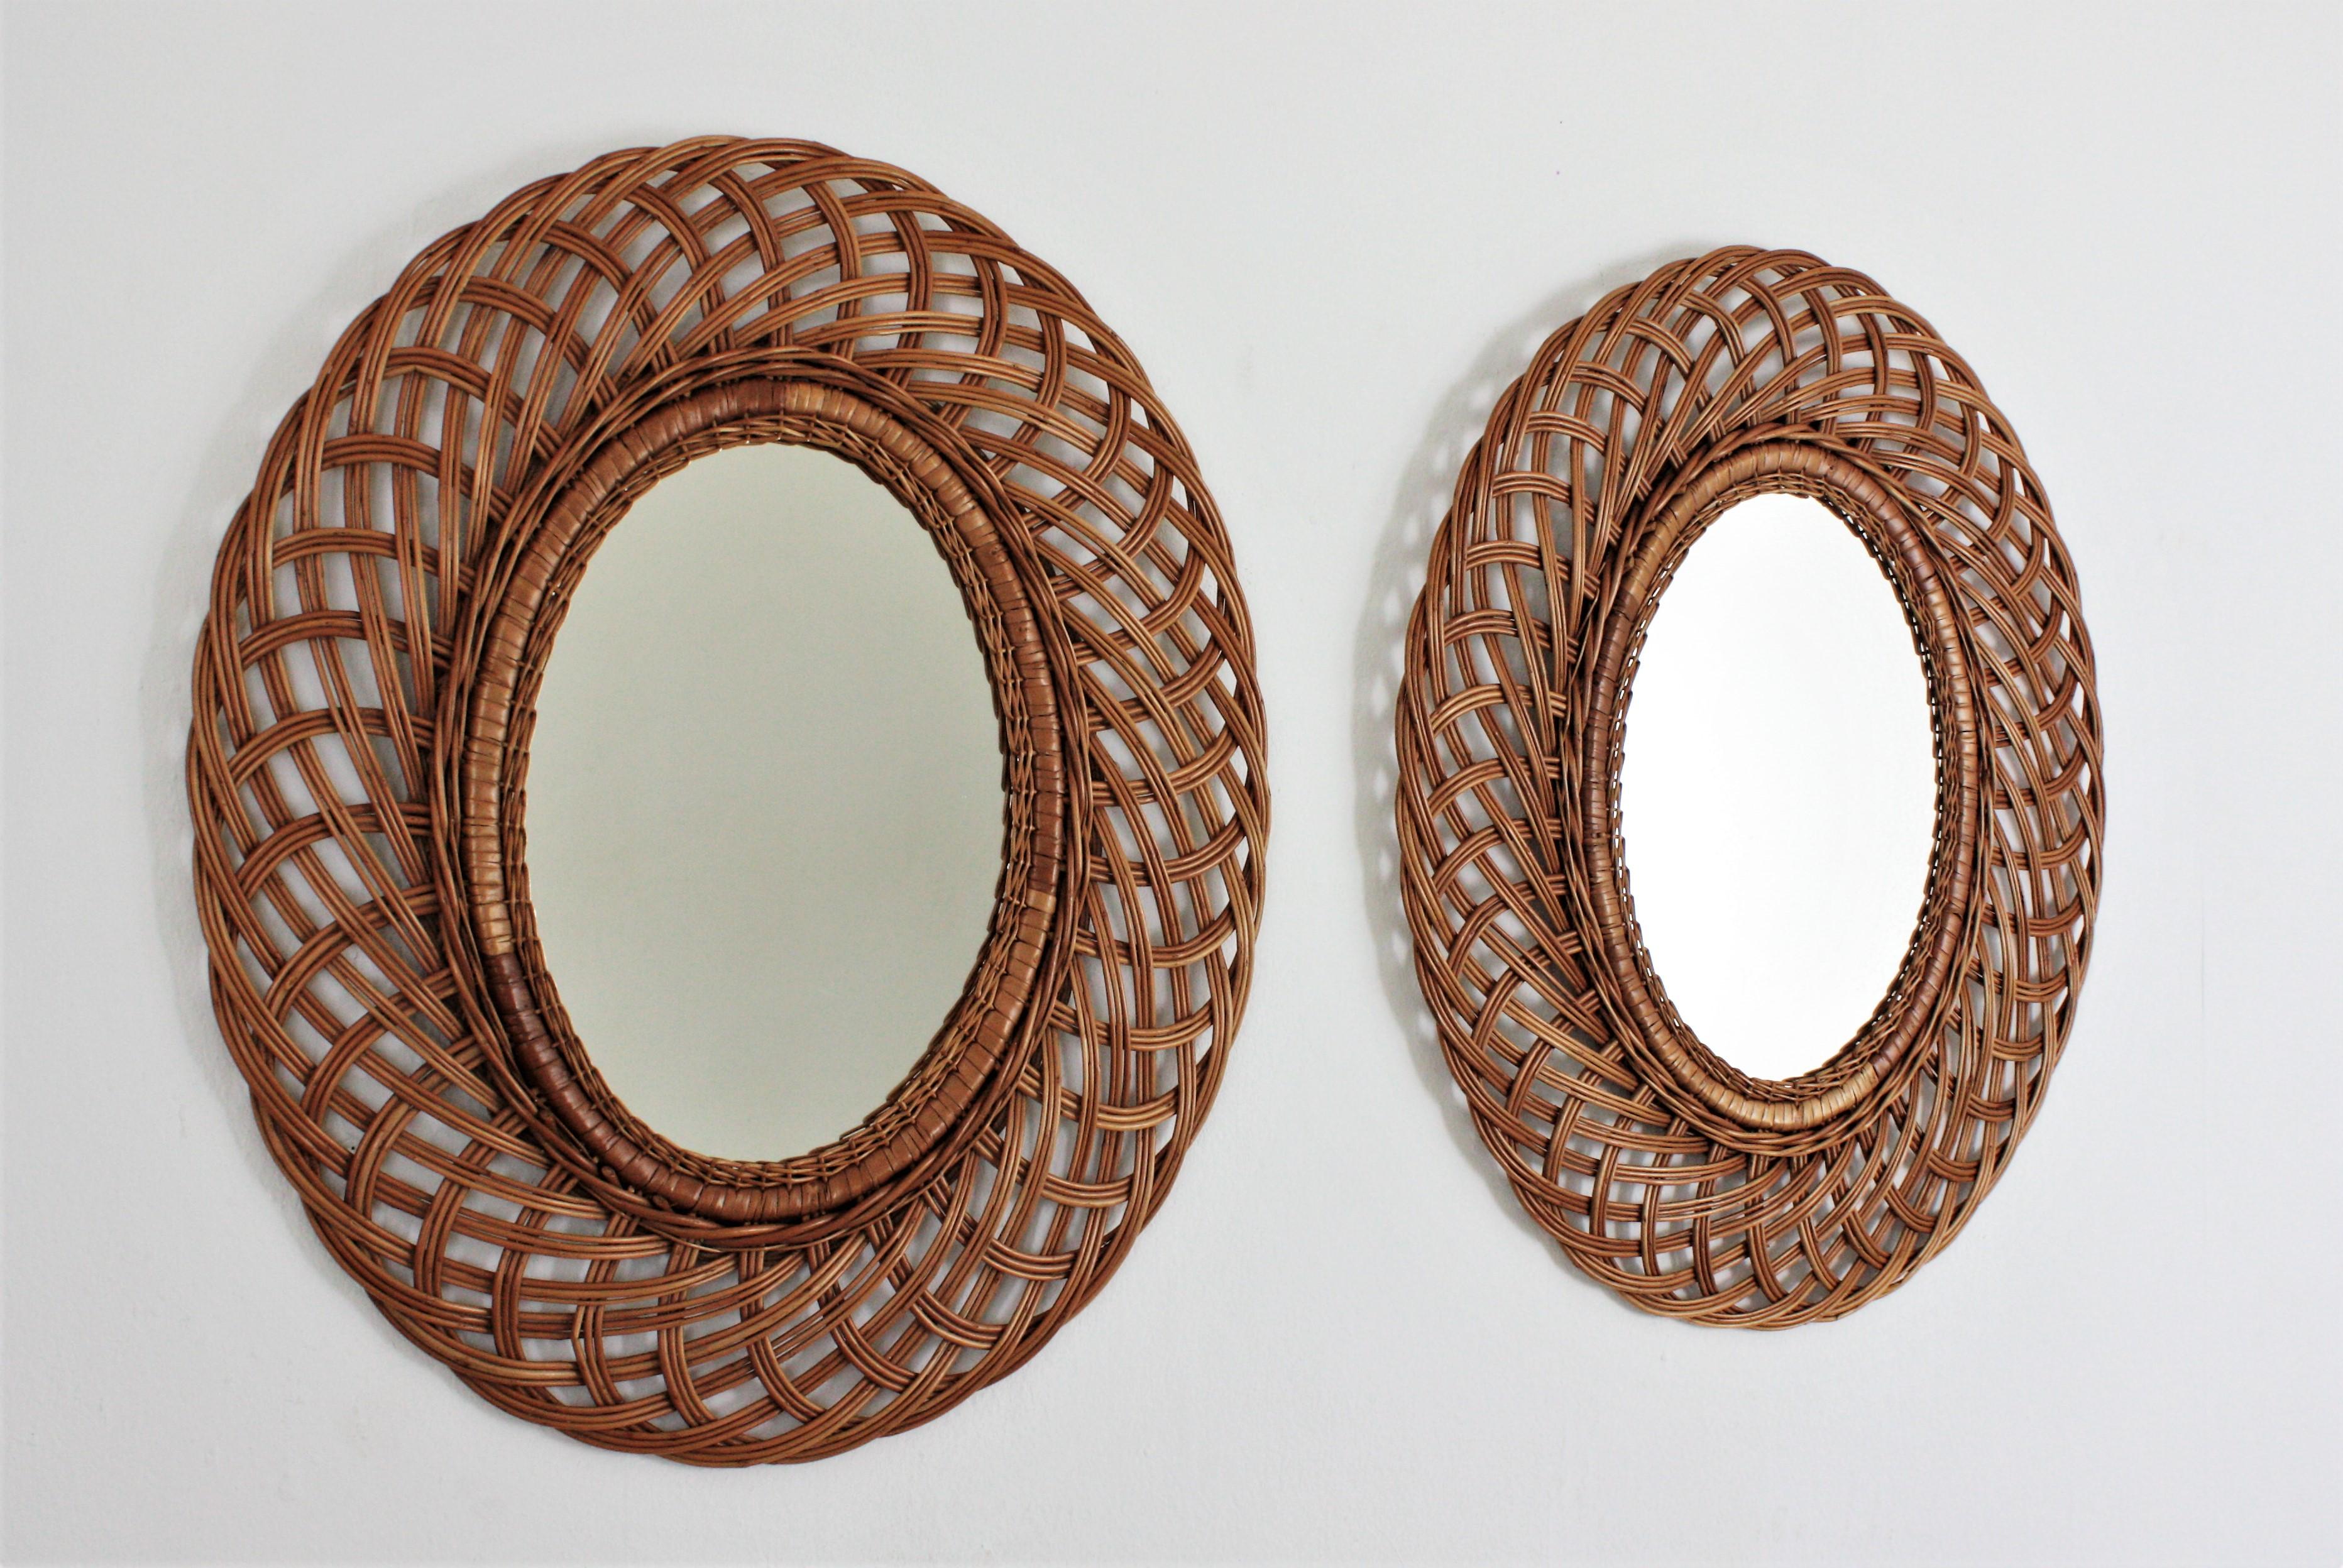 Pair of Mid-Century Modern woven rattan and wicker oval mirrors, Spain, 1960s.
These Mediterranean wall mirrors feature an oval glass surrounded by an intricate of rattan or wicker canes frames.
They will add a fresh accent wherever you place